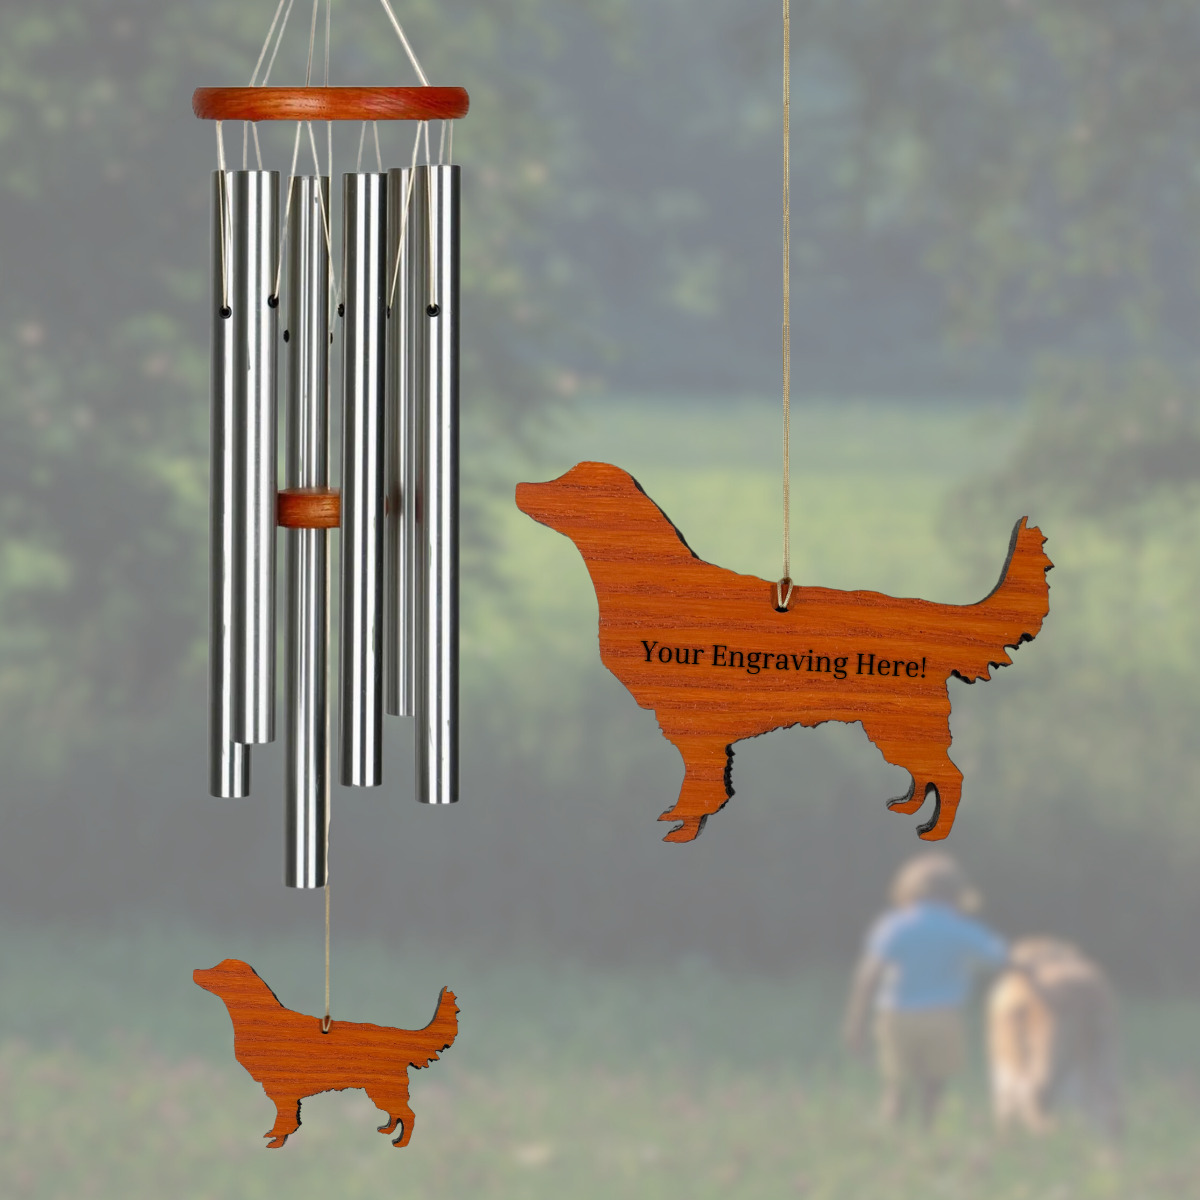 Amazing Grace 25 Inch Silver Wind Chime - Engravable Dog Sail